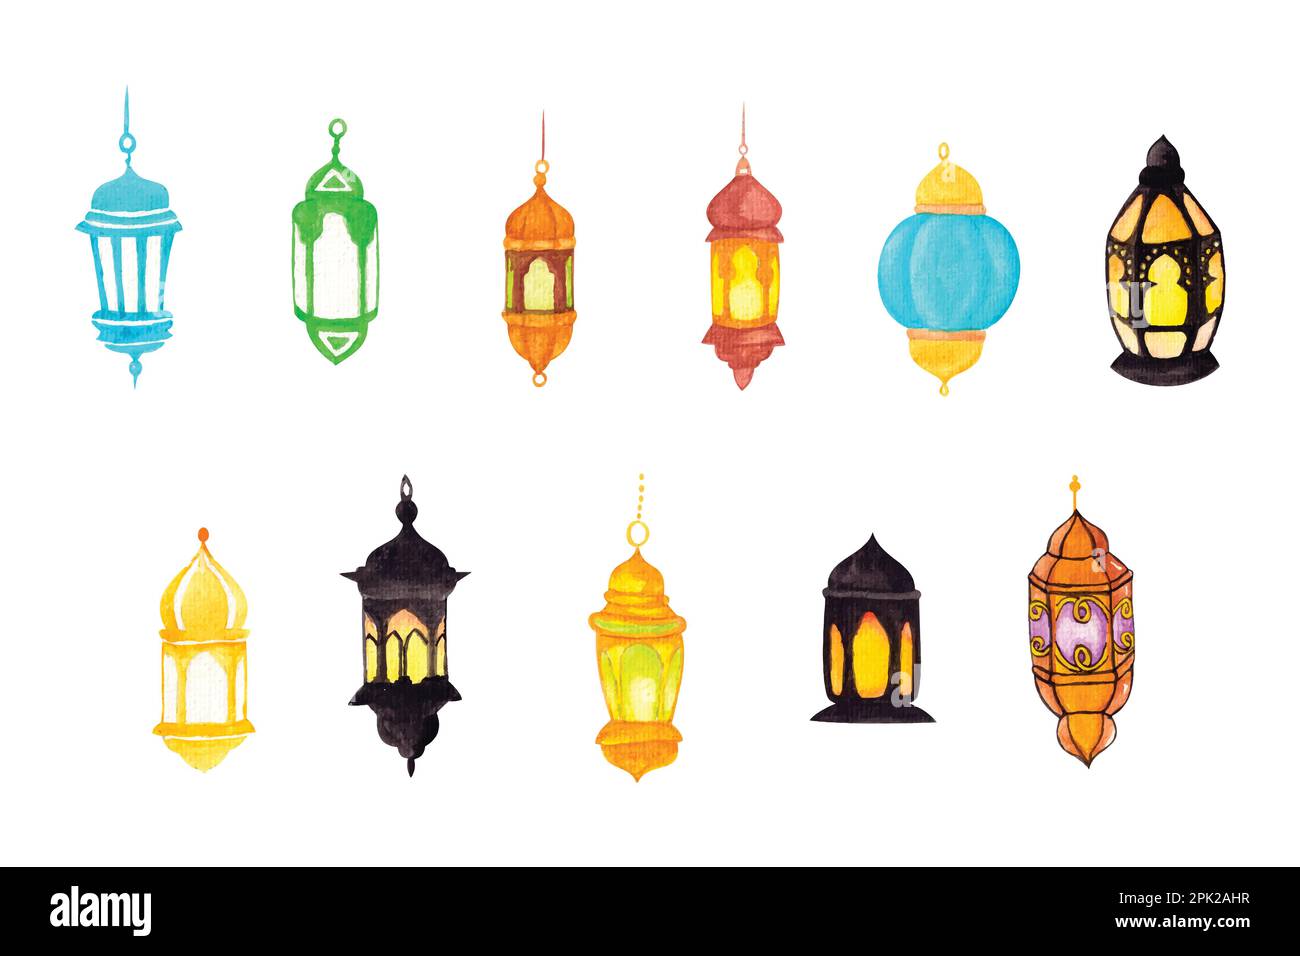 Some of the lanterns are hand drawn, hand drawn watercolor vector illustration for greeting card or invitation design Stock Vector